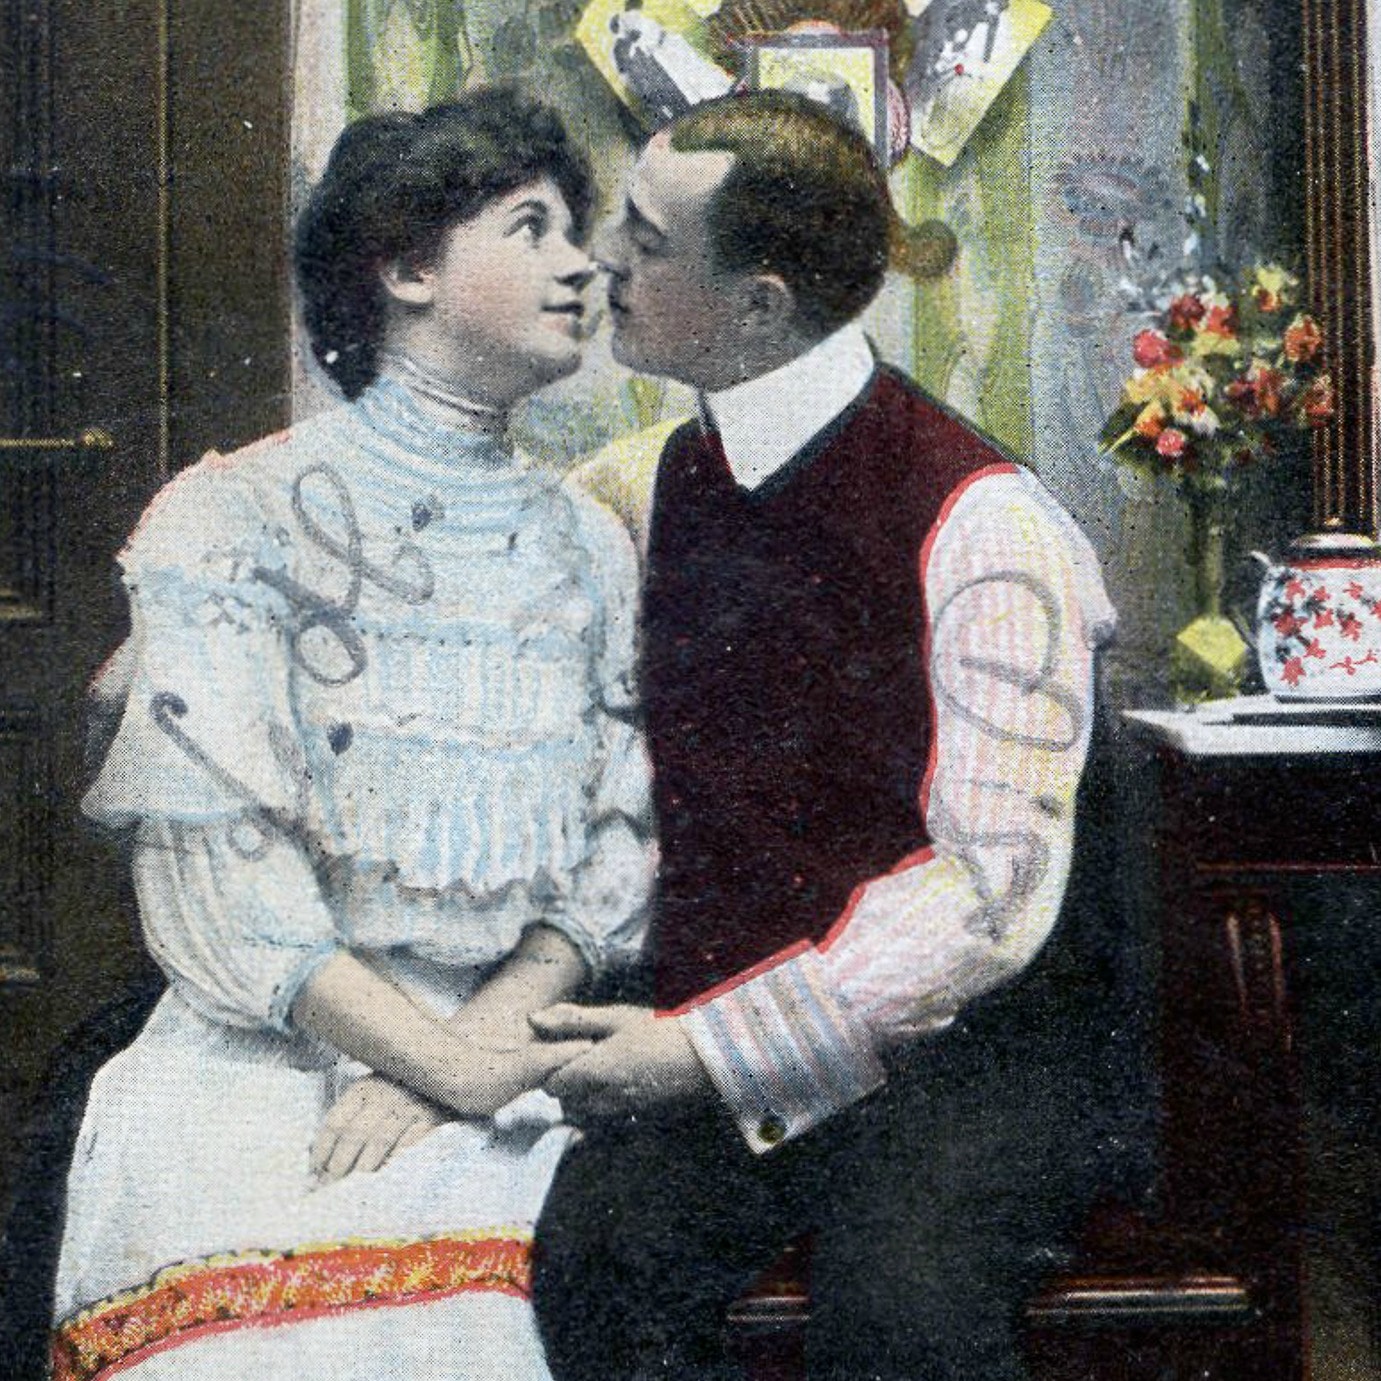 Vintage Valentine’s Day Postcards and Cards